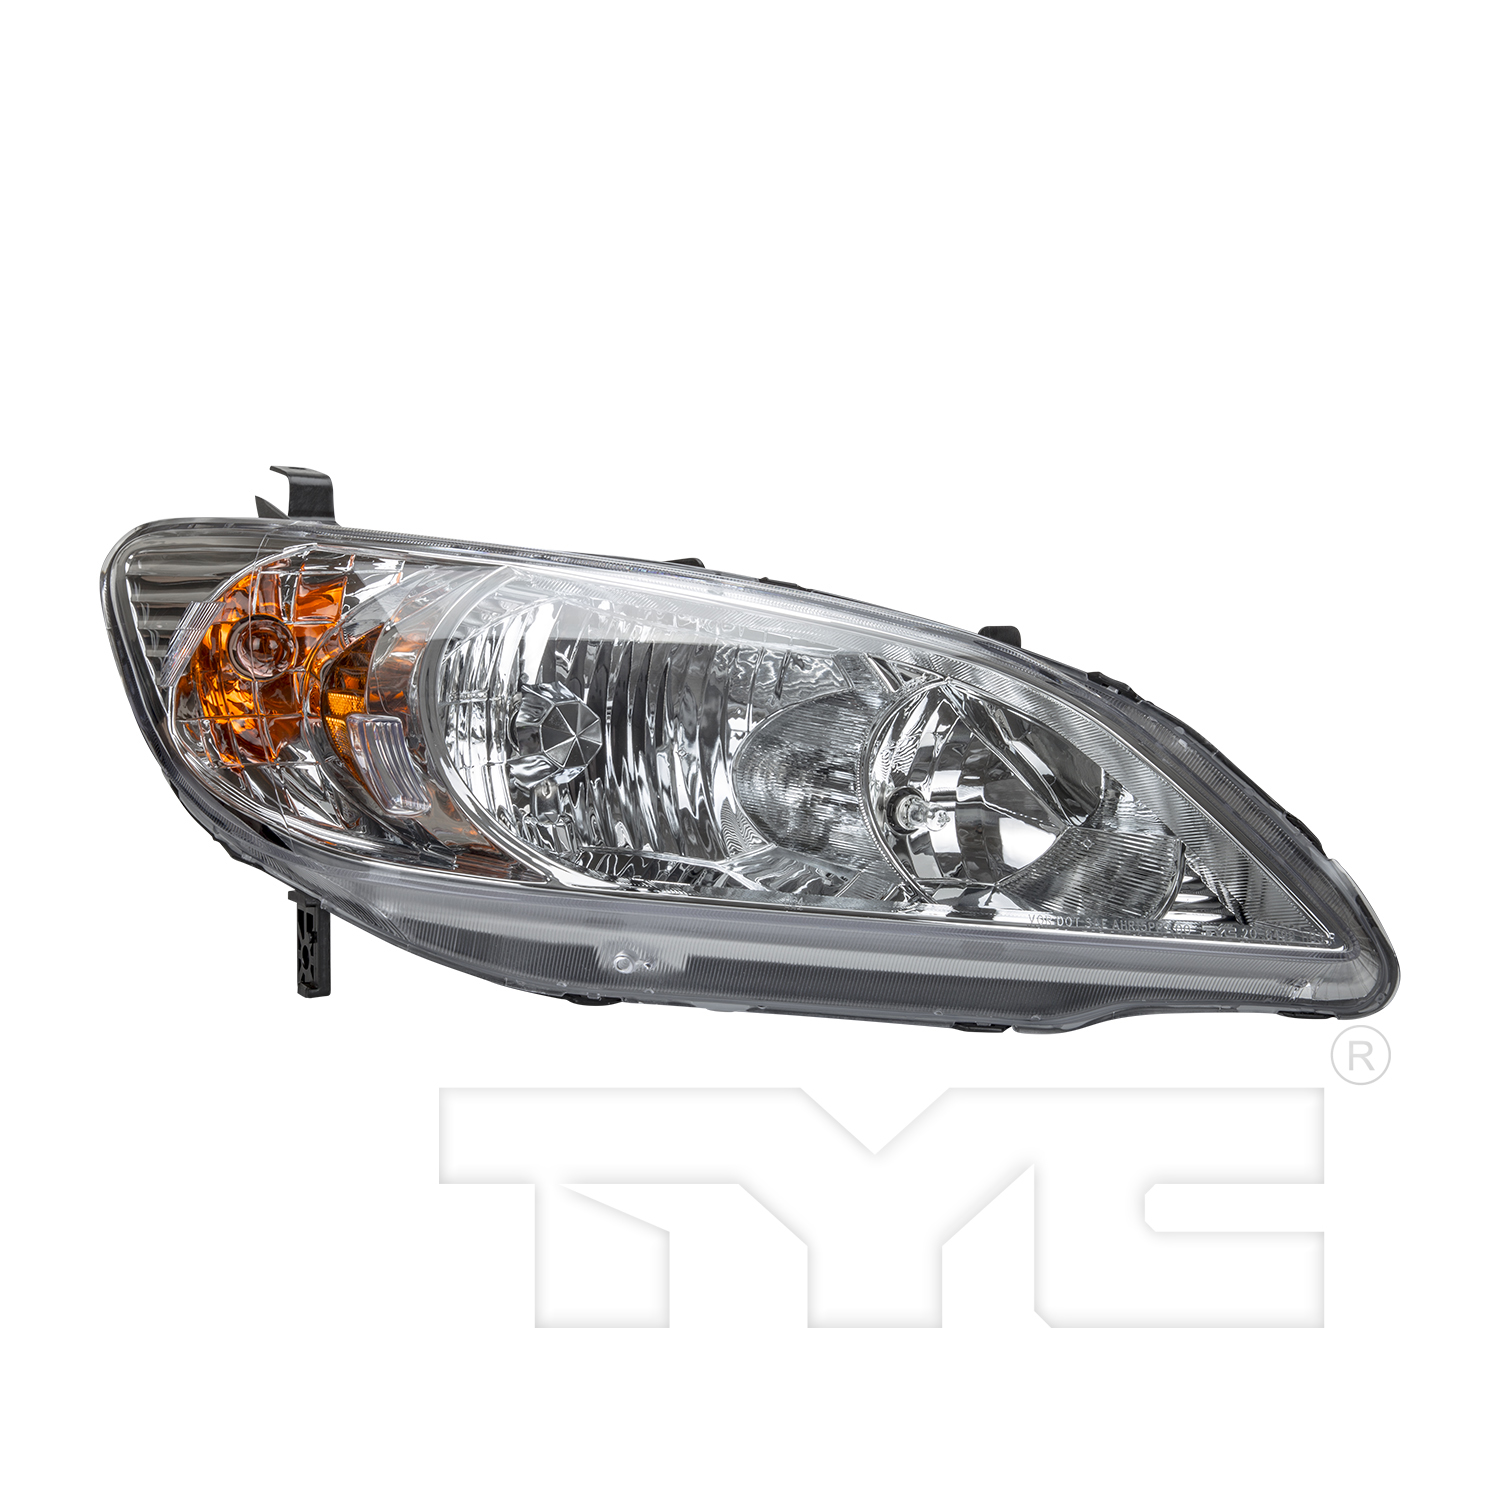 Aftermarket HEADLIGHTS for HONDA - CIVIC, CIVIC,04-05,RT Headlamp assy composite